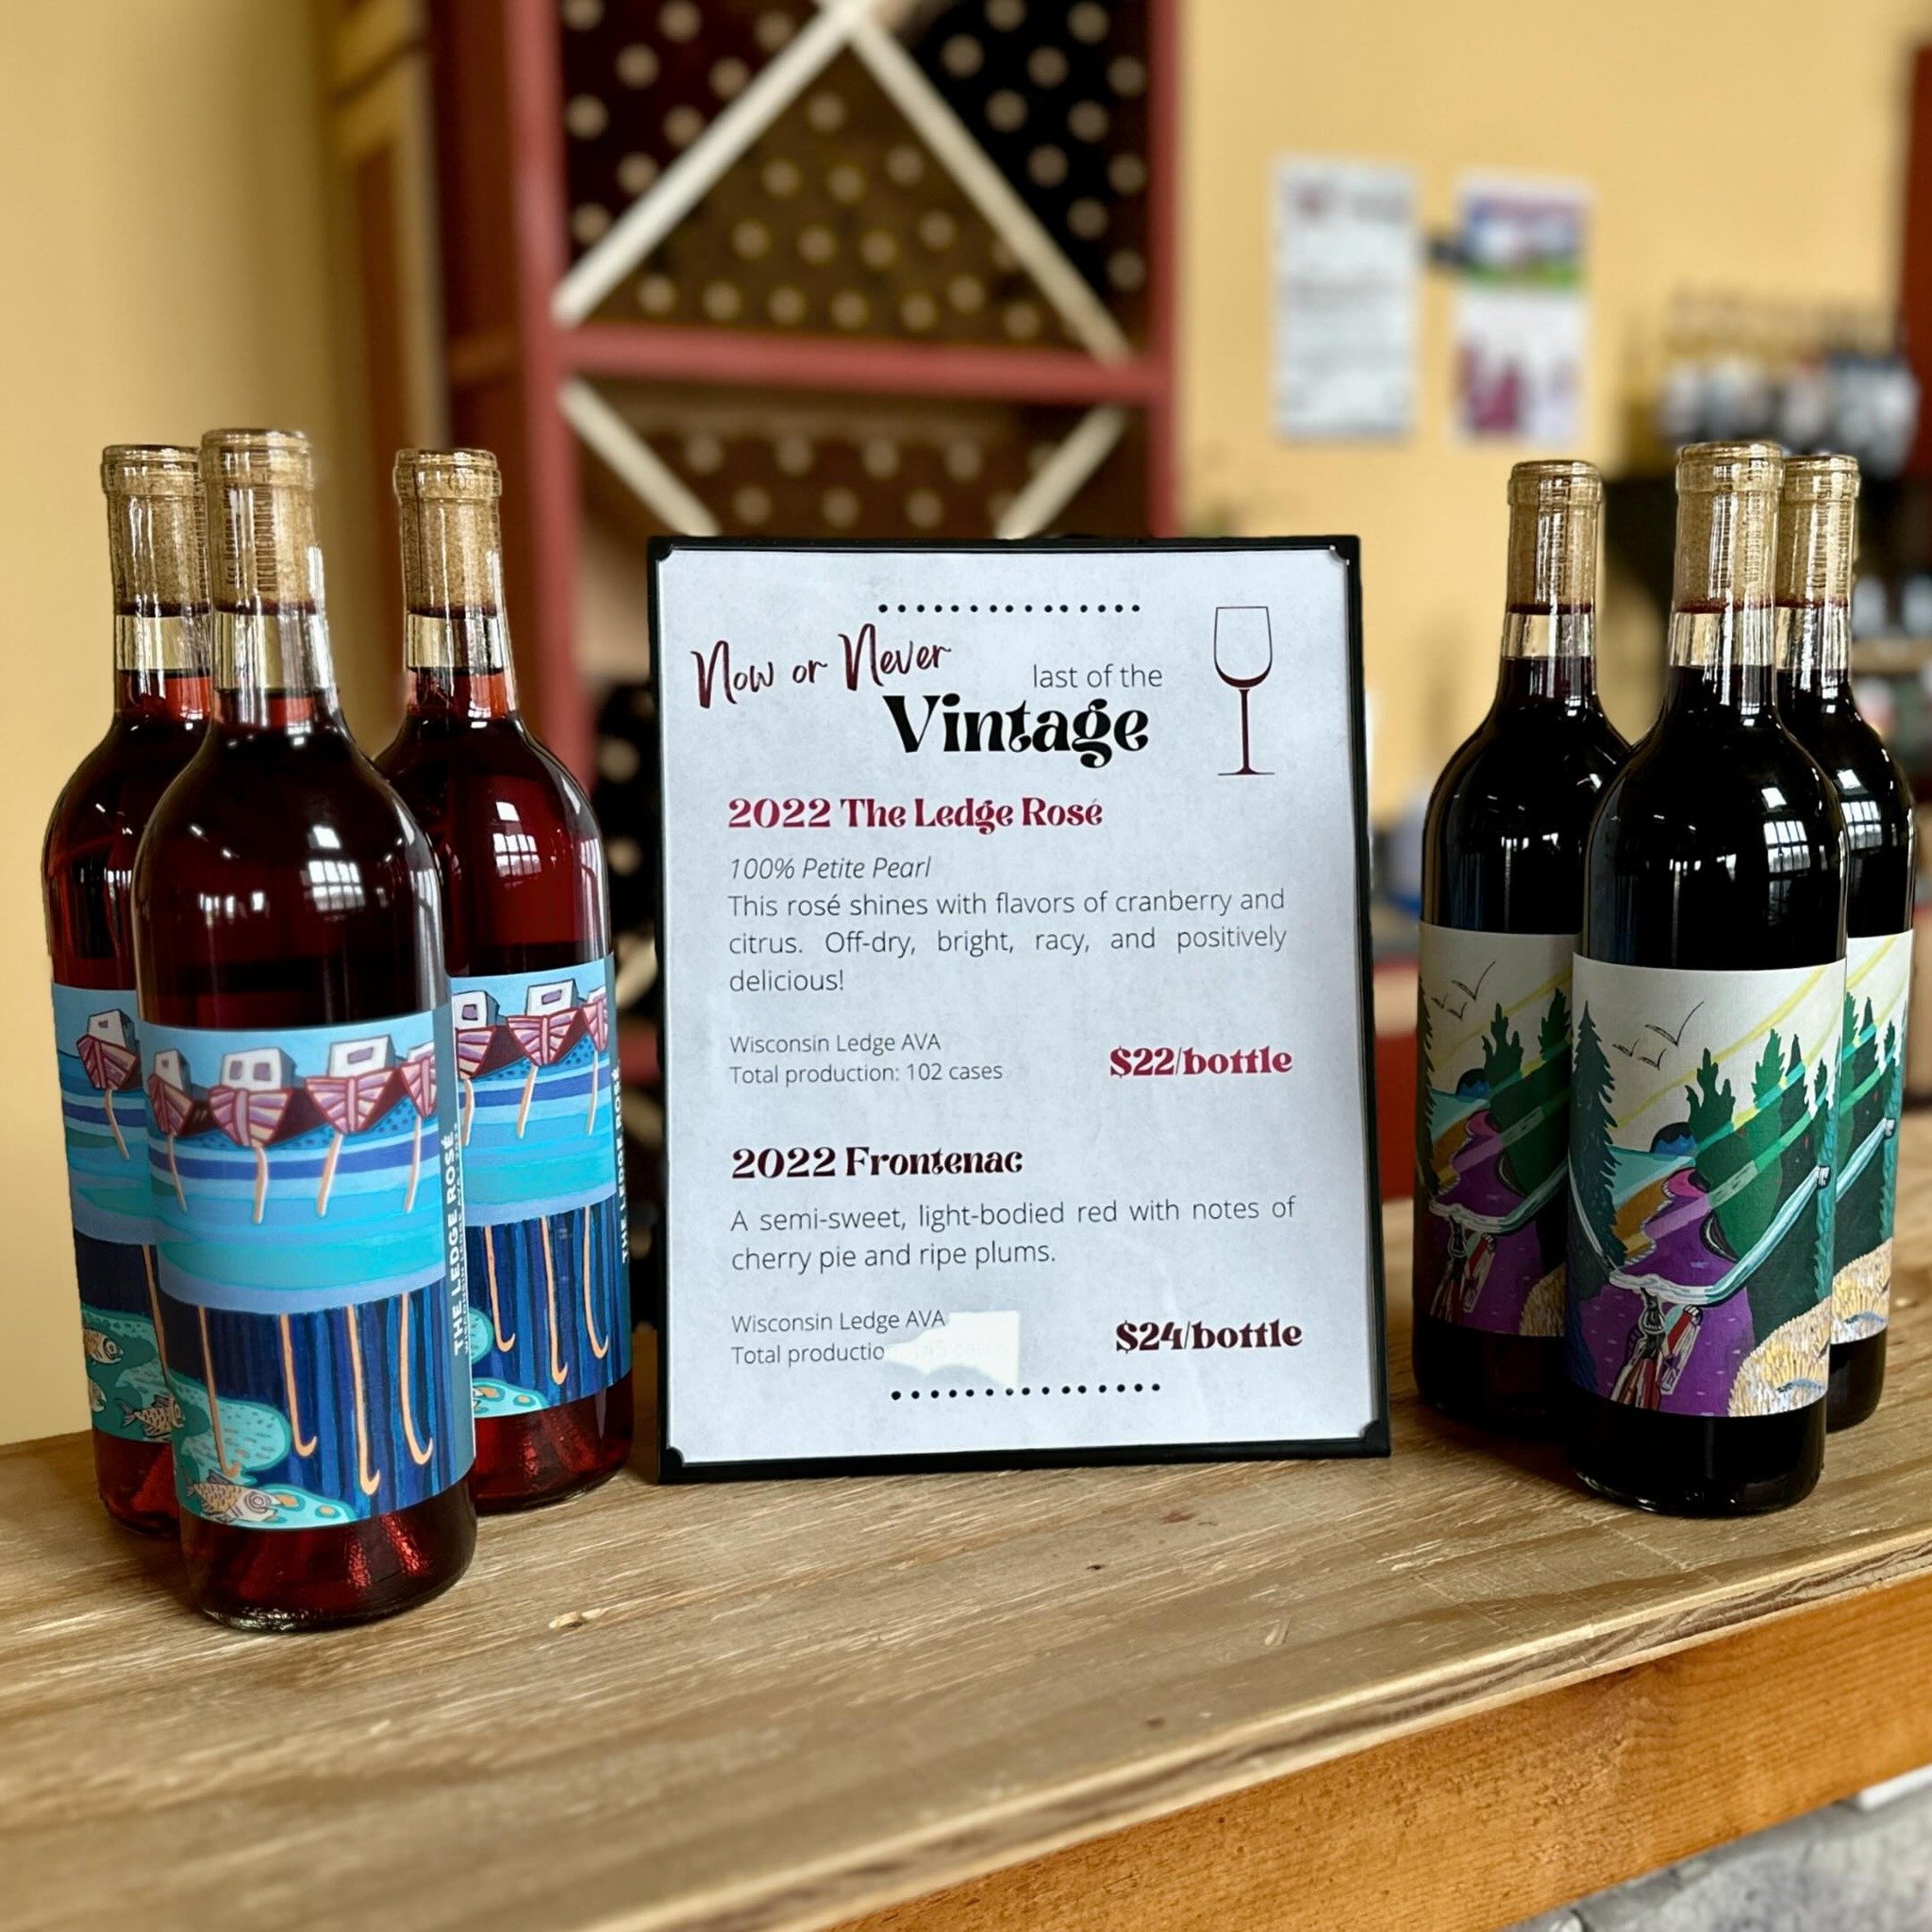 LAST CALL 📣 The end is near for two bottles from our first vintage of Wisconsin Ledge AVA wines.

2022 The Ledge Ros&eacute; 🍷 
100% Petite Pearl &bull; This ros&eacute; shines with flavors of cranberry and citrus. Off-dry, bright, racy, and positi